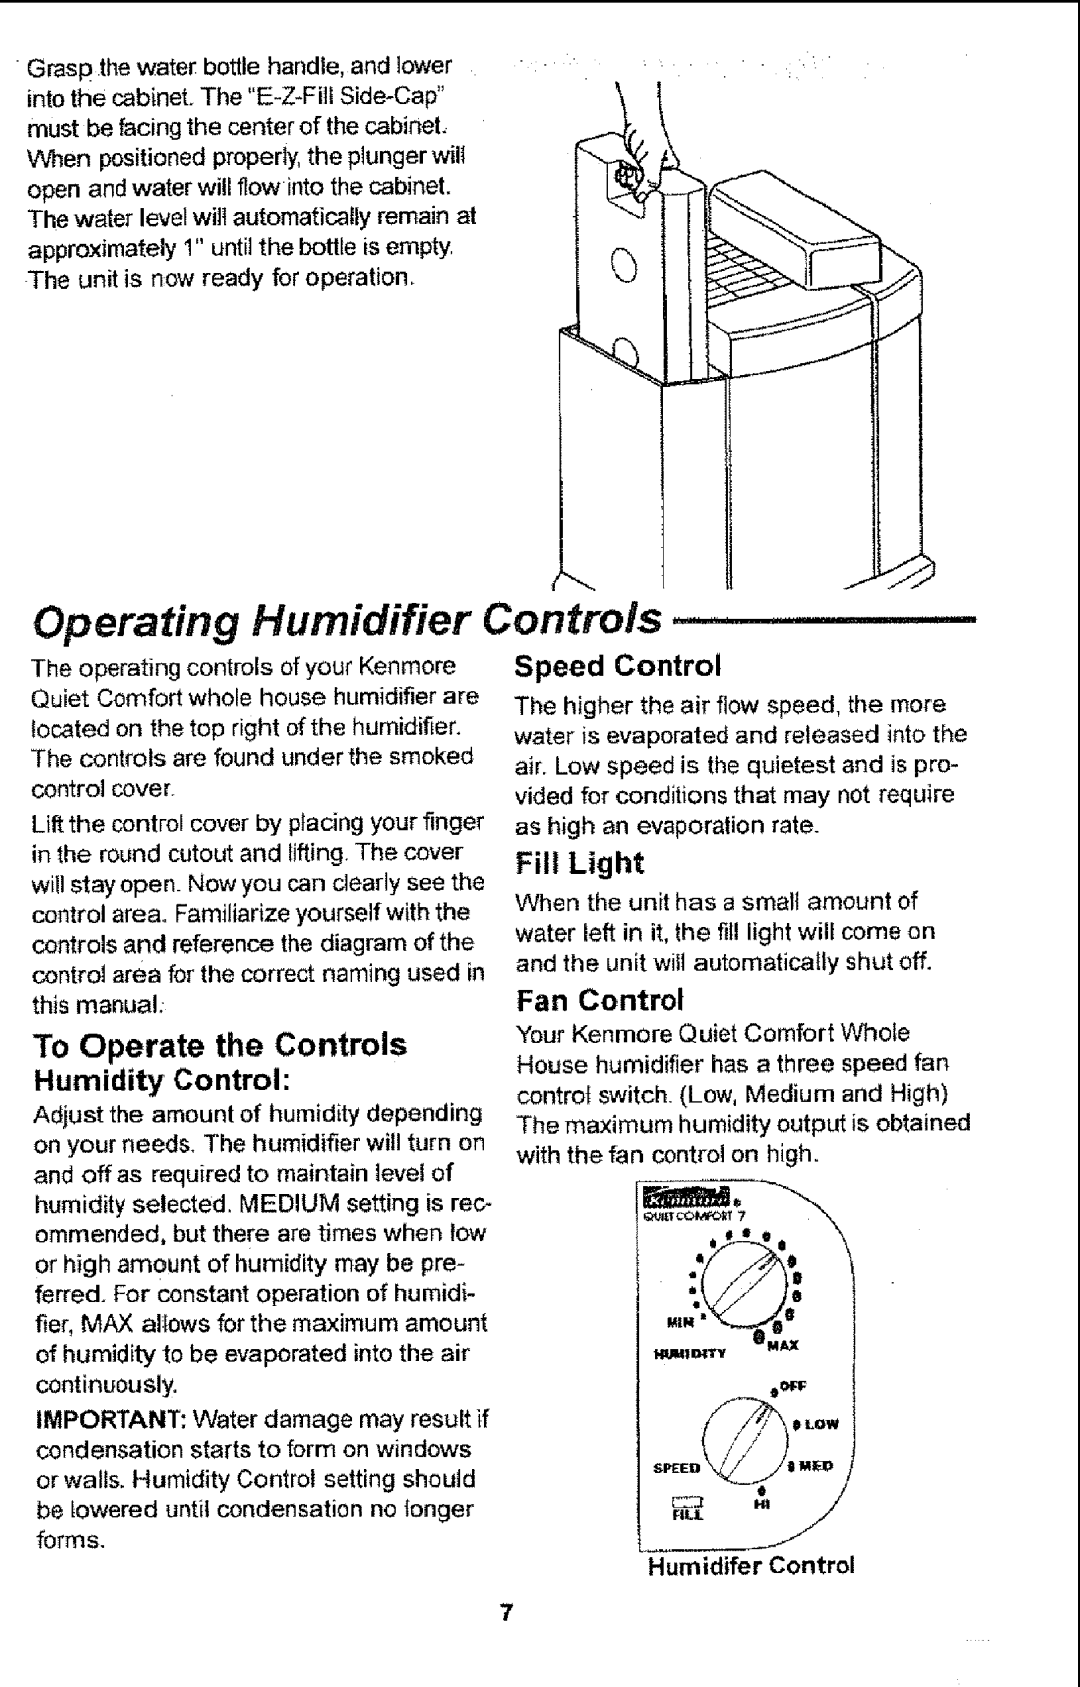 Sears 758.14451 Operating Humidifier Controls, Humidity Control, Speed Control, Fill Light, To Operate the Controls 